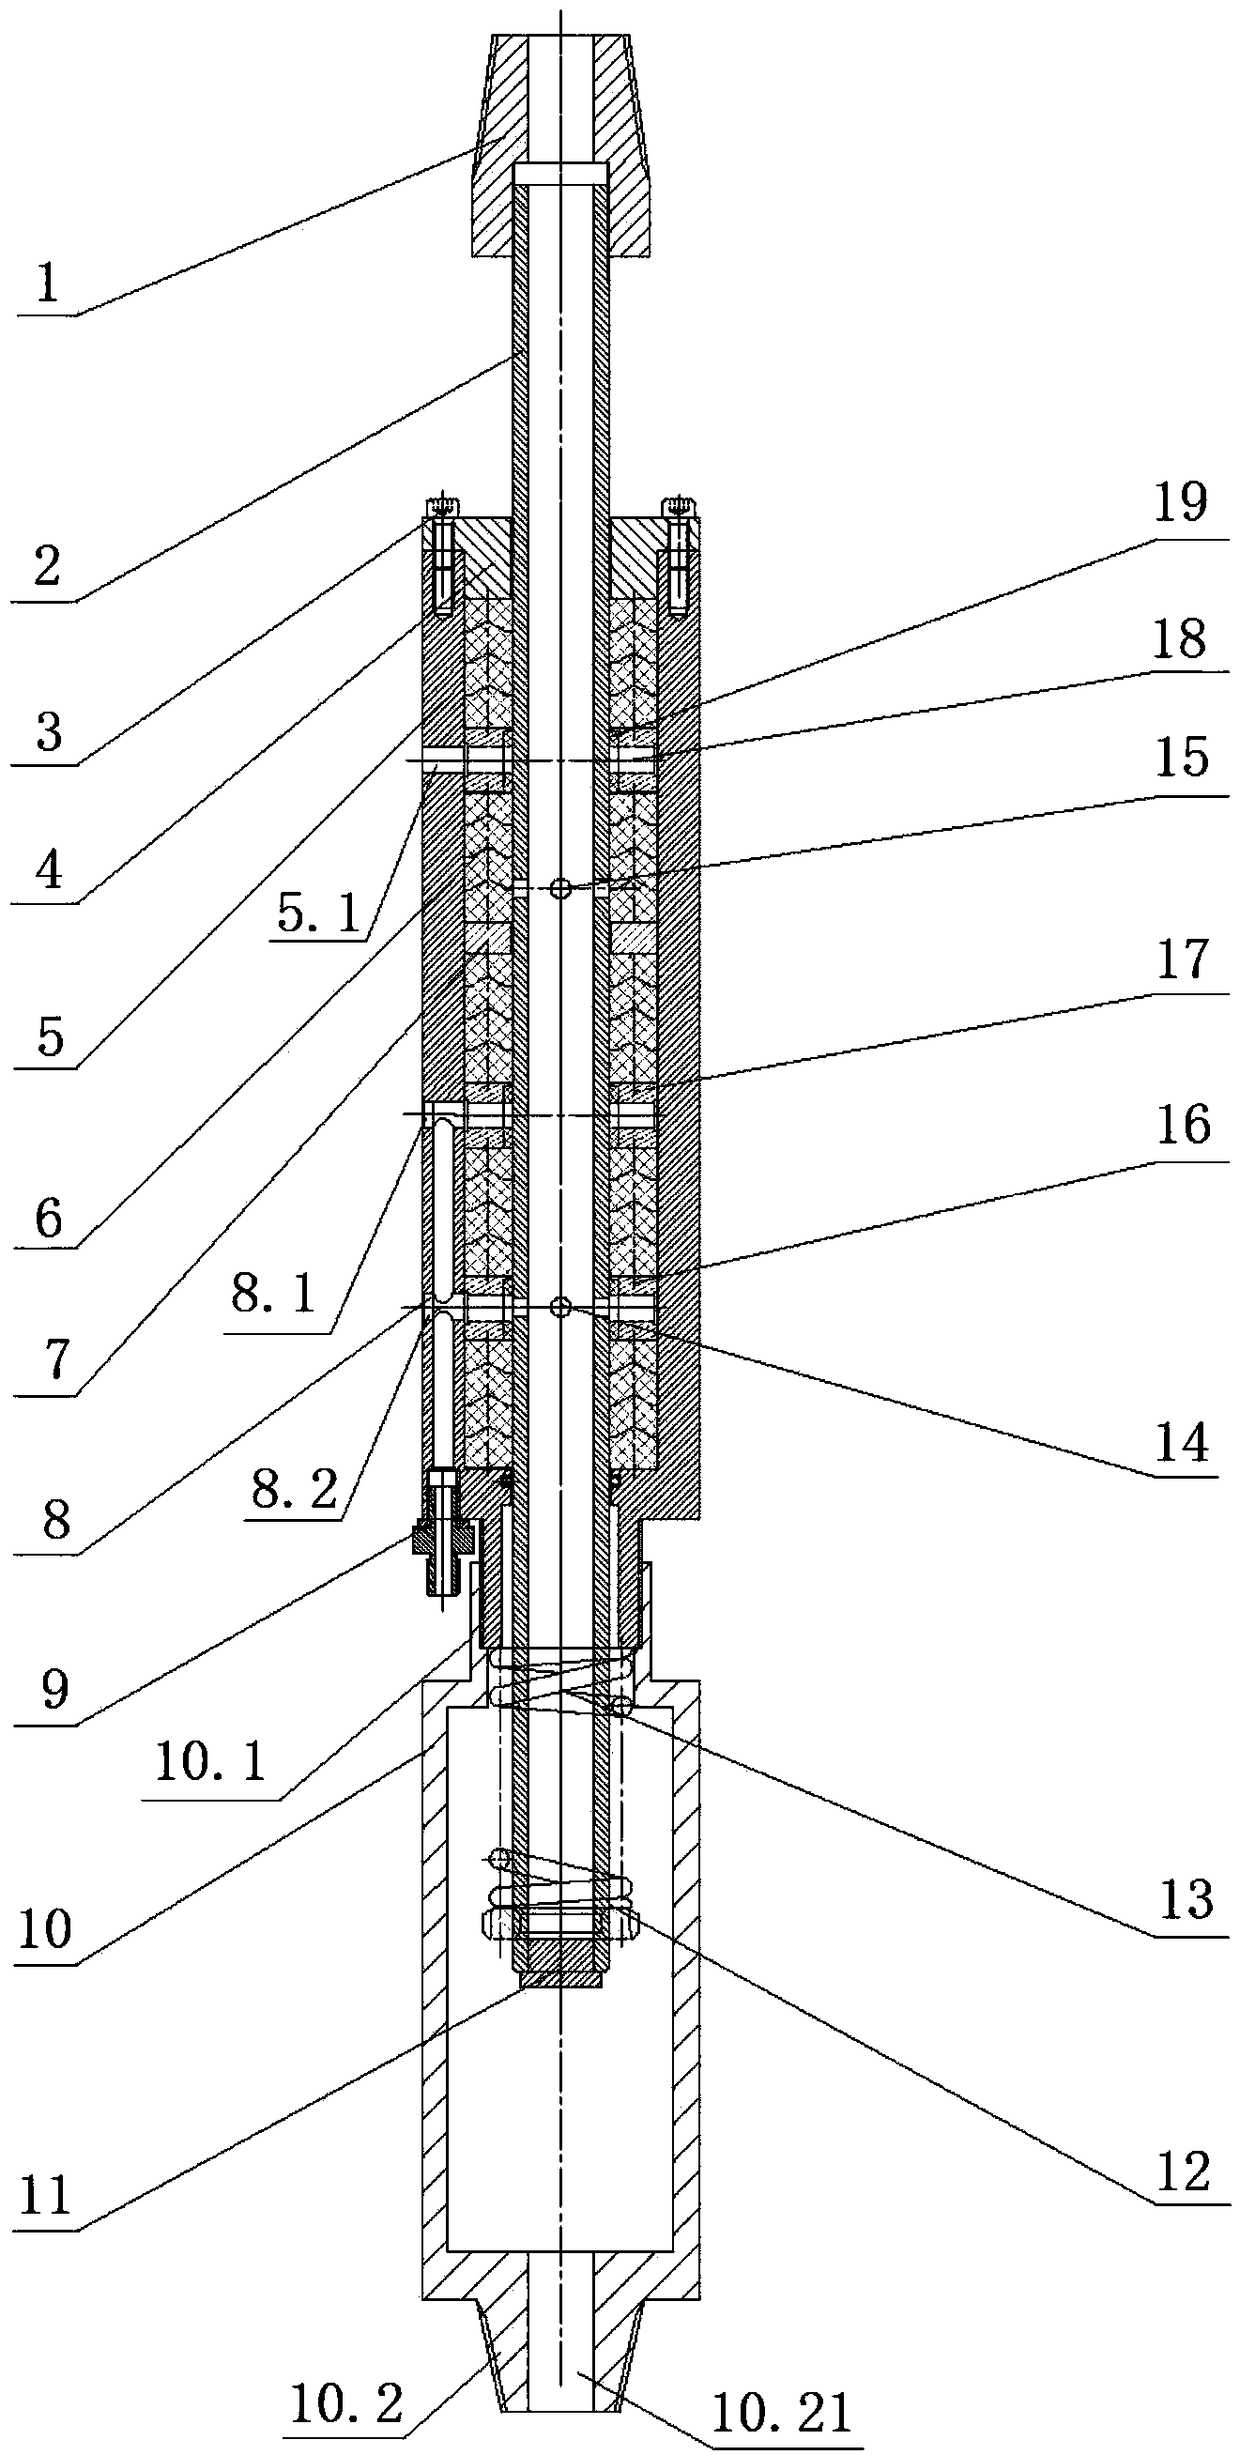 Water pressure test in borehole multichannel multiplexing rapid pressure relief device and method